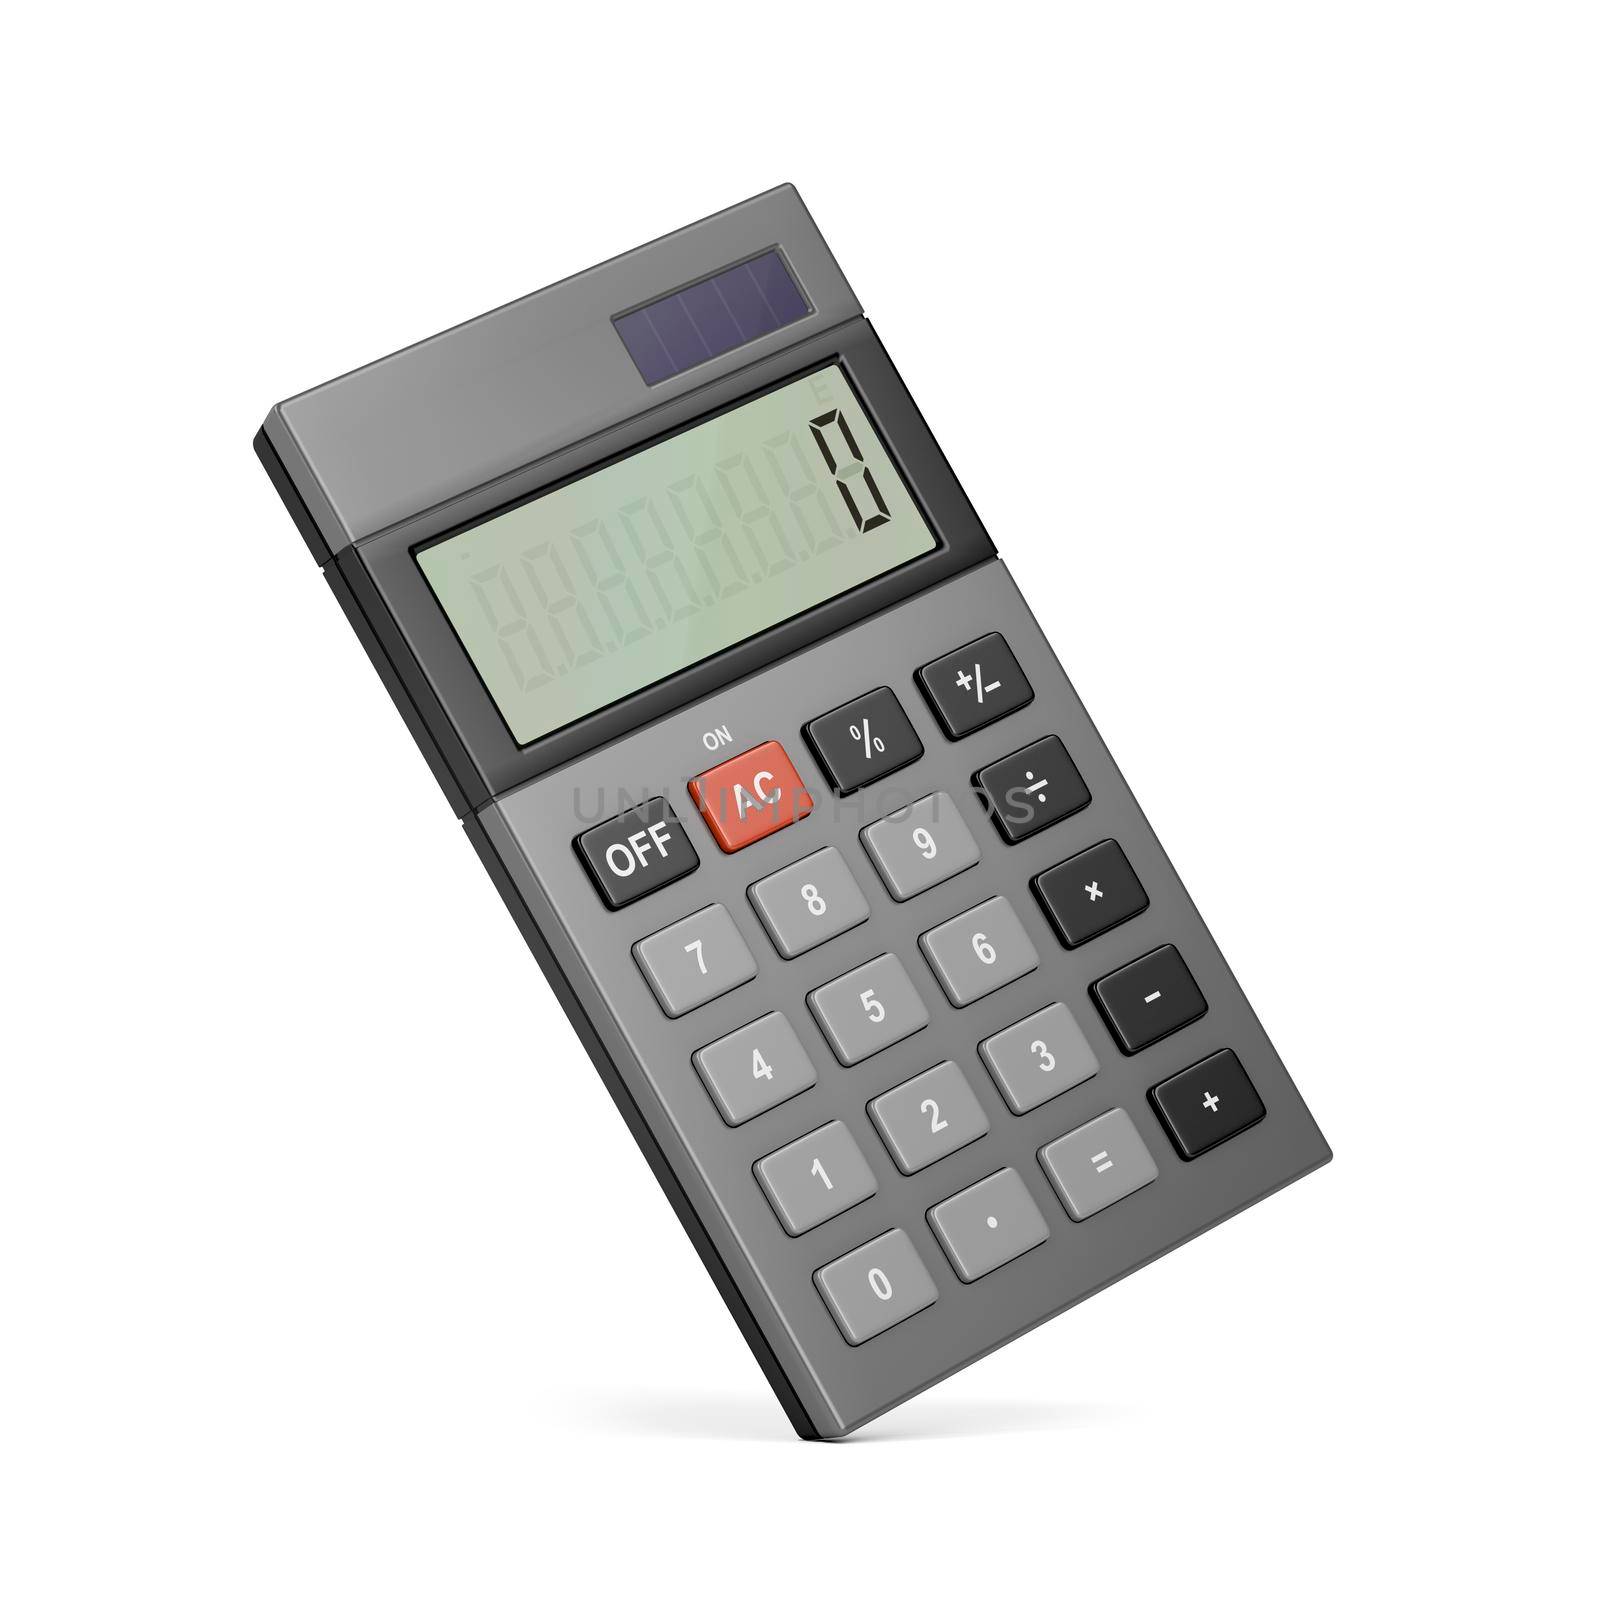 Calculator on white background by magraphics